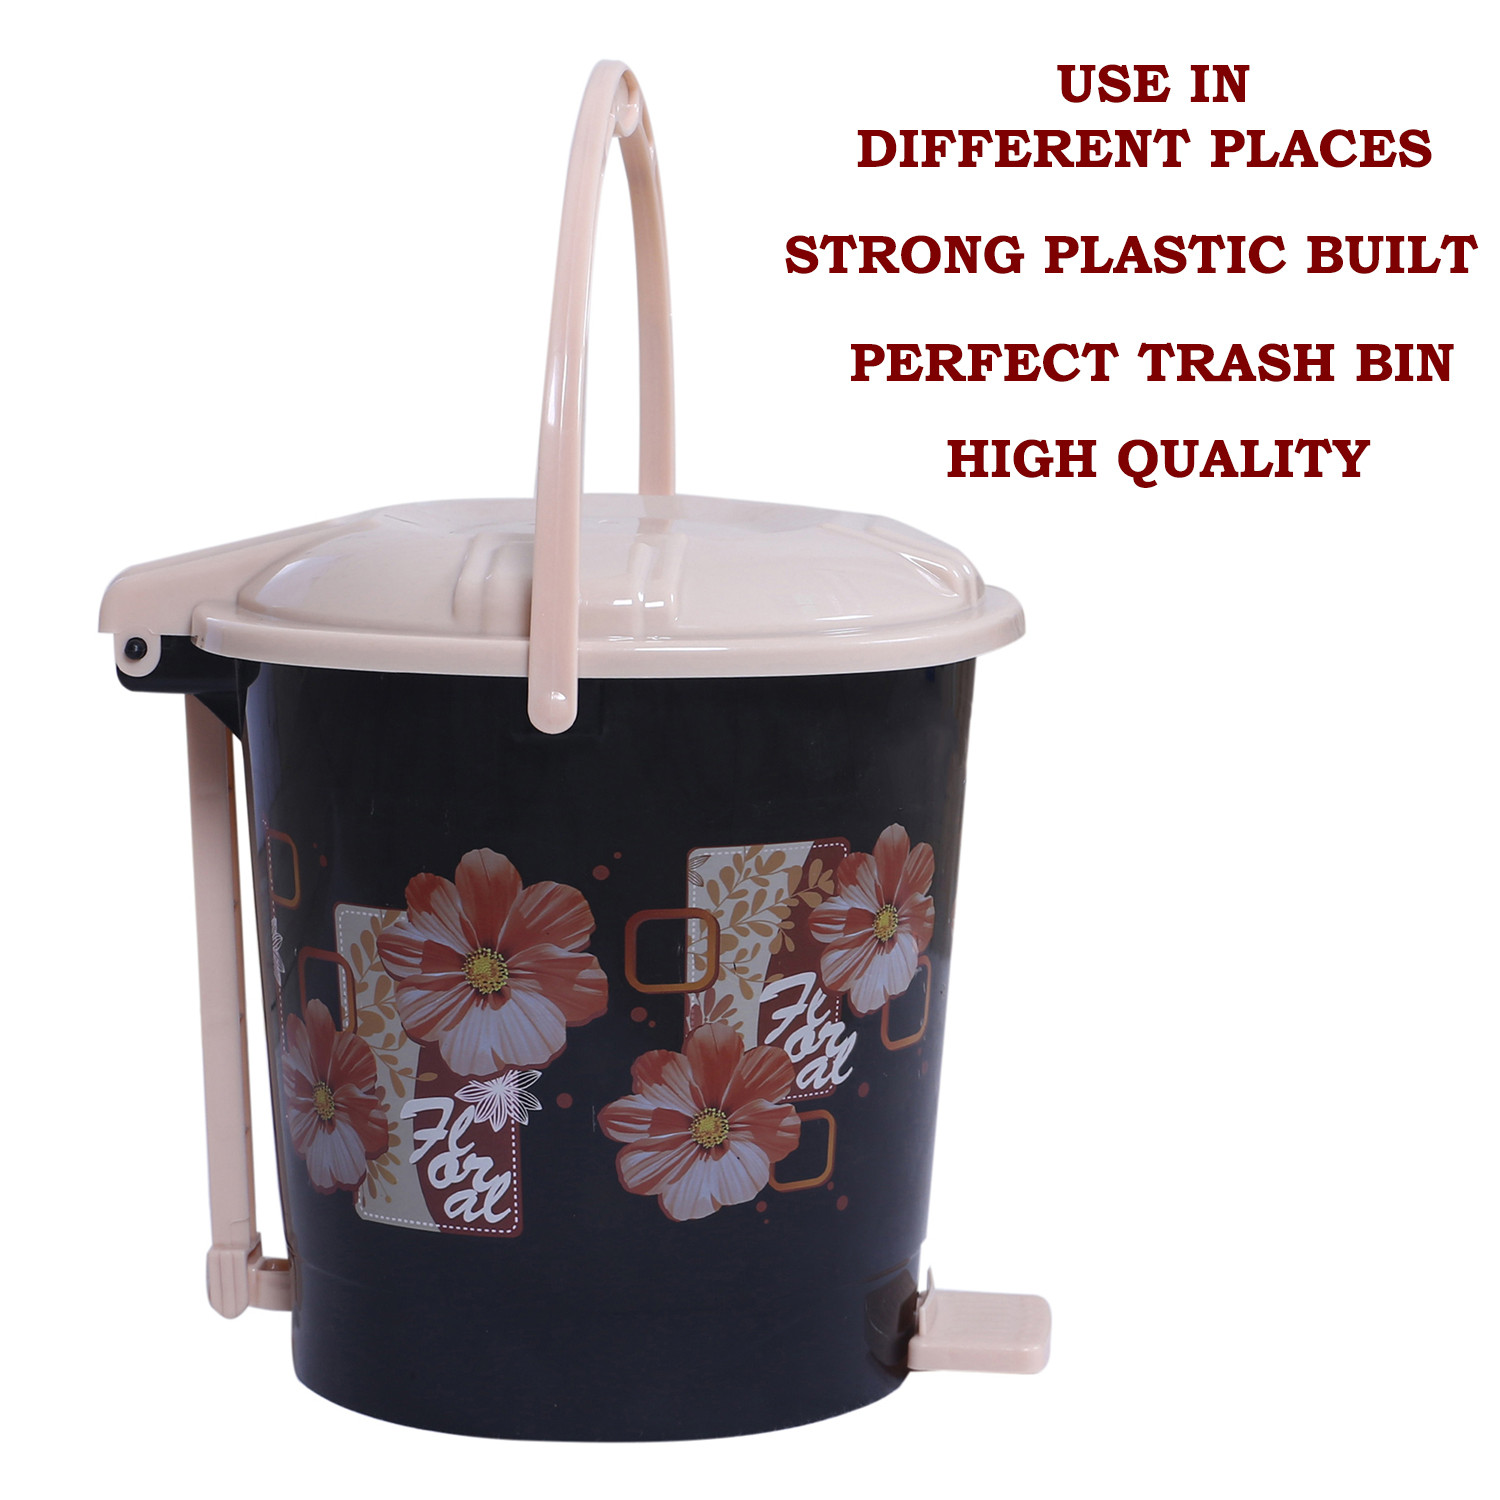 Kuber Industries Durable Floral & Flower Print Plastic Pedal Dustbin|Waste Bin|Trash Can For Kitchen & Home With Handle,10 Litre,Pack of 2 (Black)